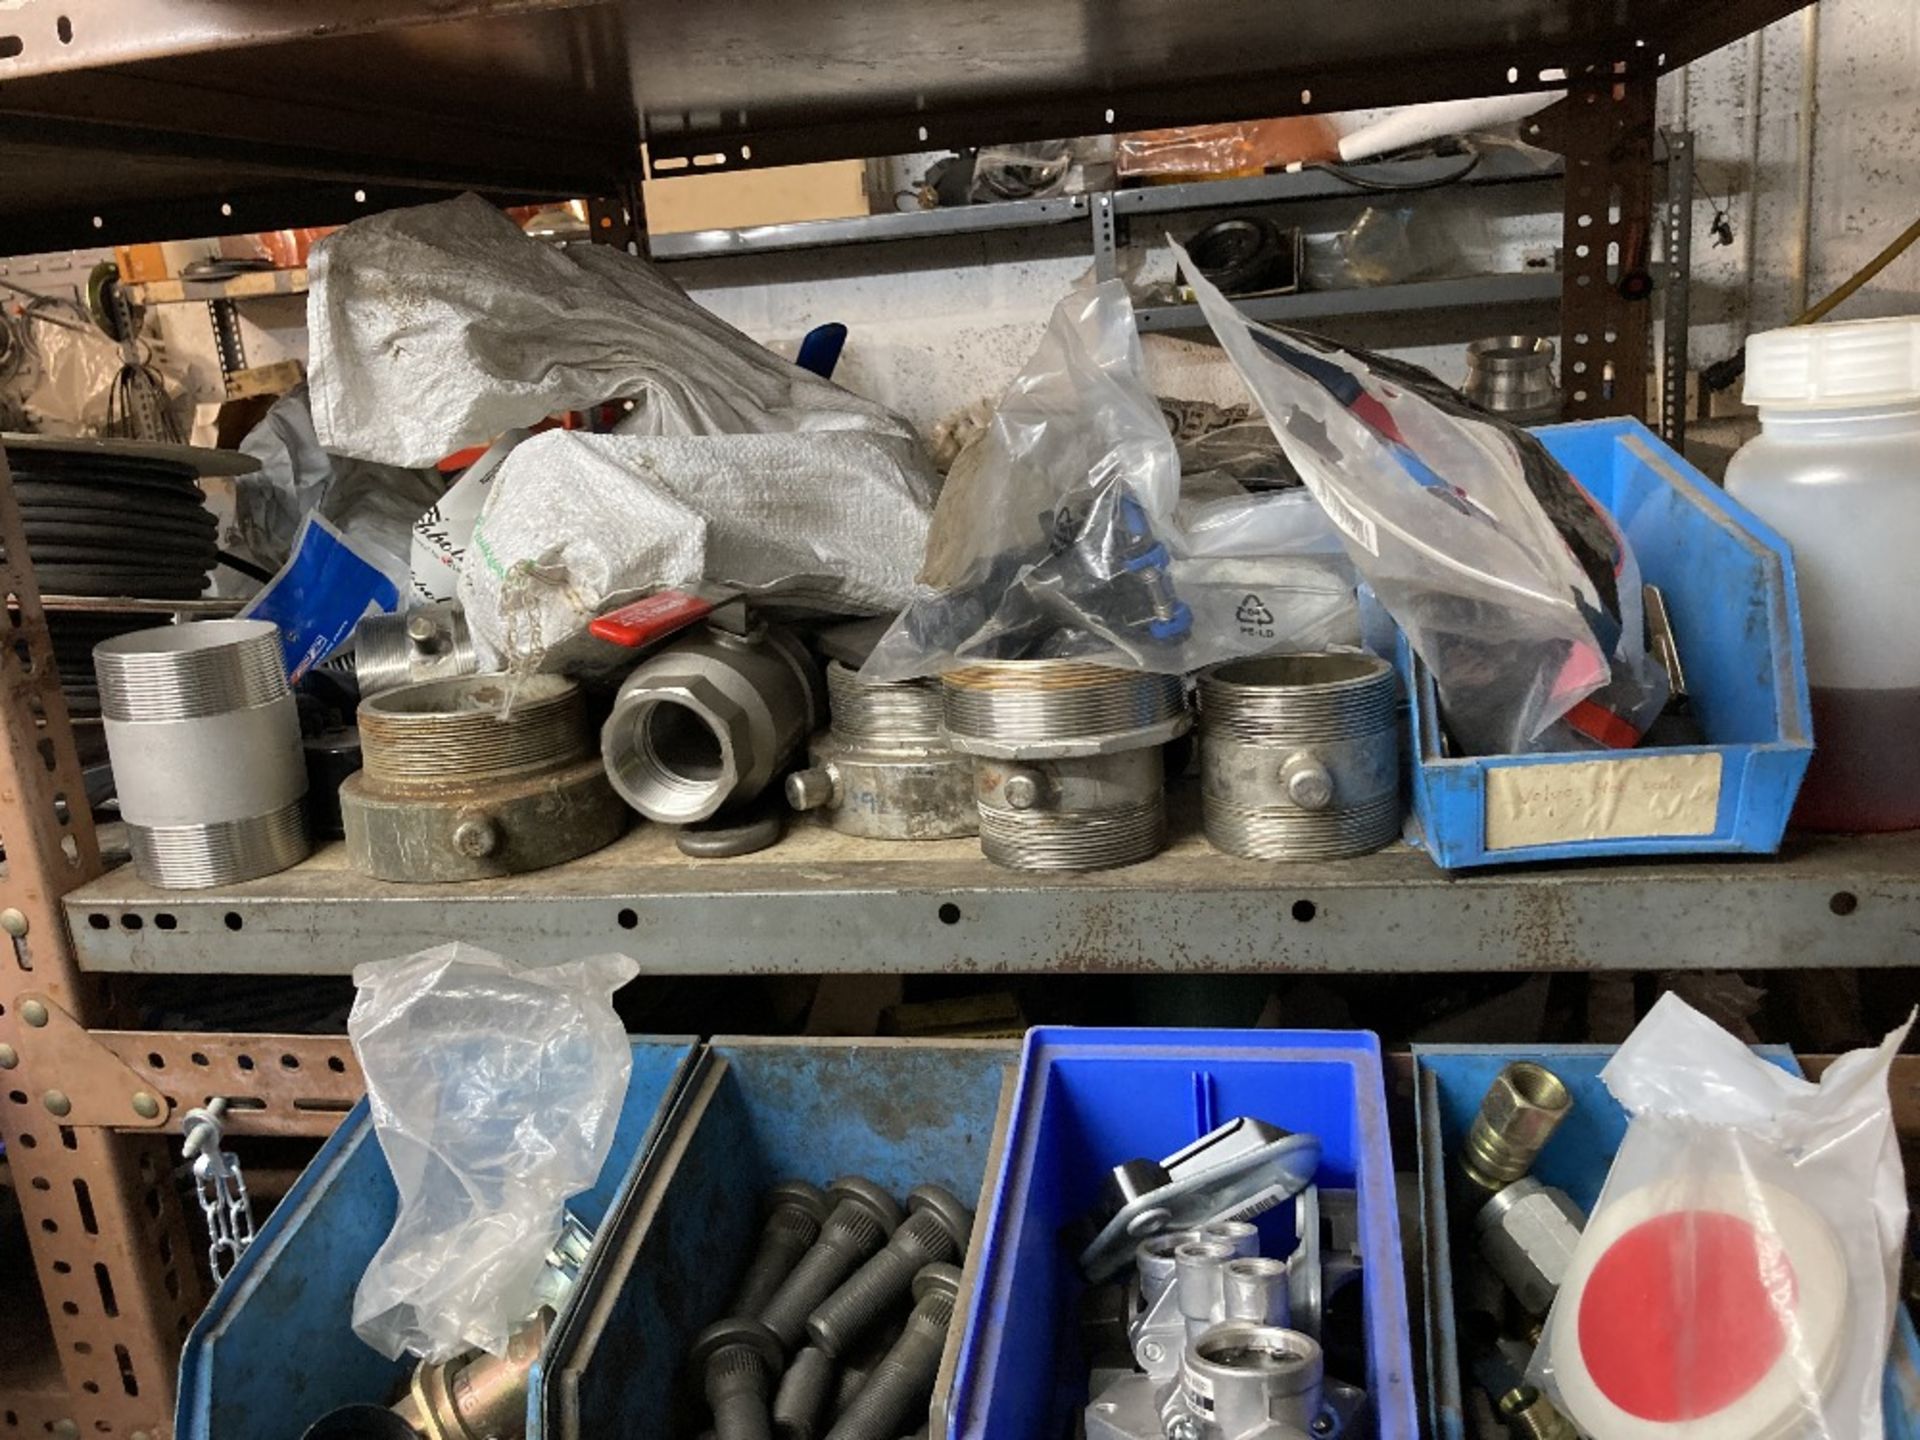 Content of Parts Room Containing Large Quantity of Various Parts & Components - Image 128 of 150